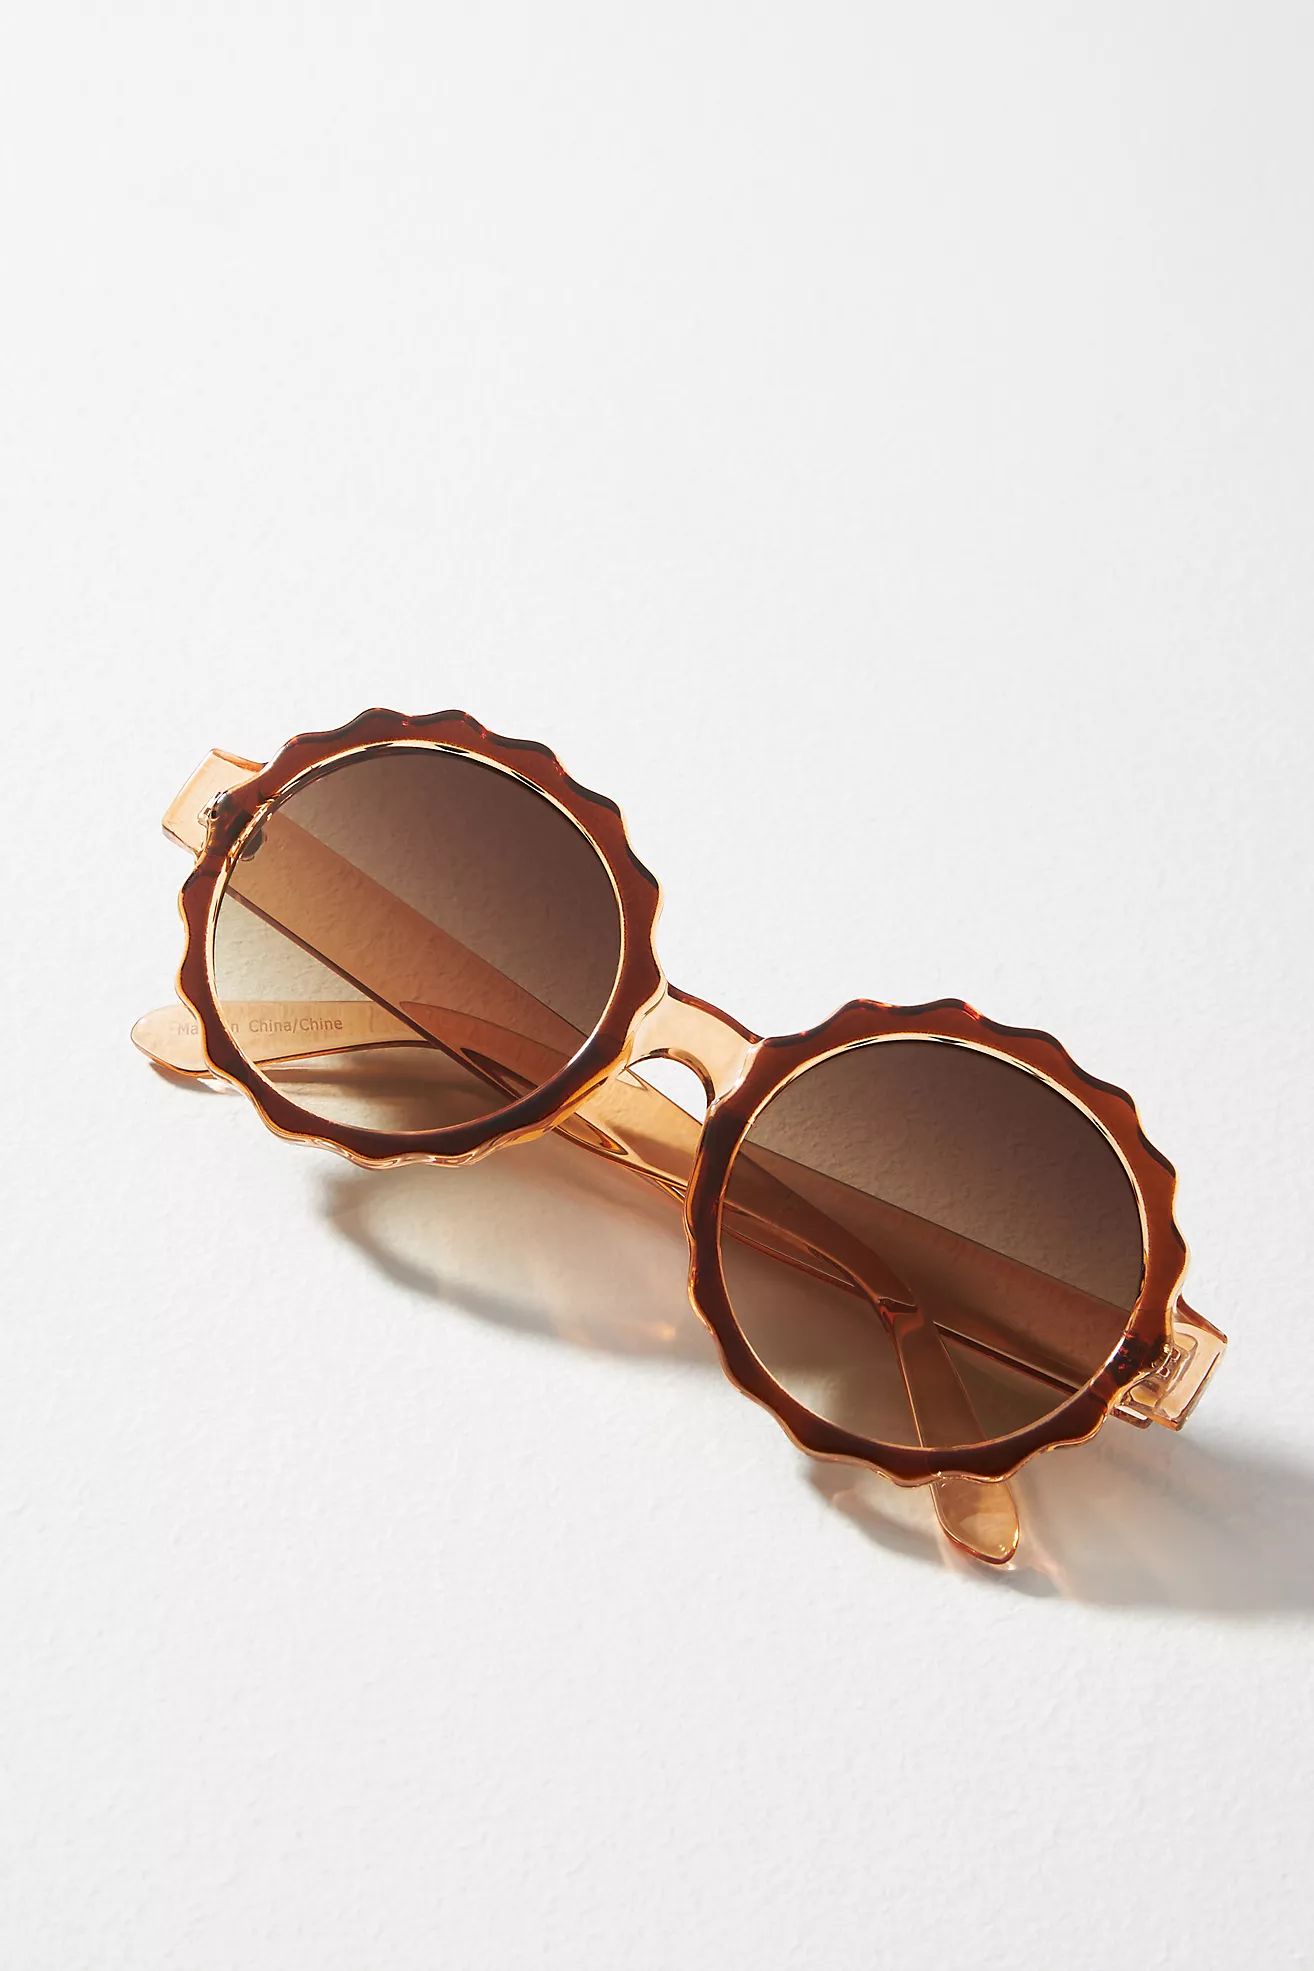 Maeve by Anthropologie Scalloped Circle Sunglasses | Anthropologie (US)